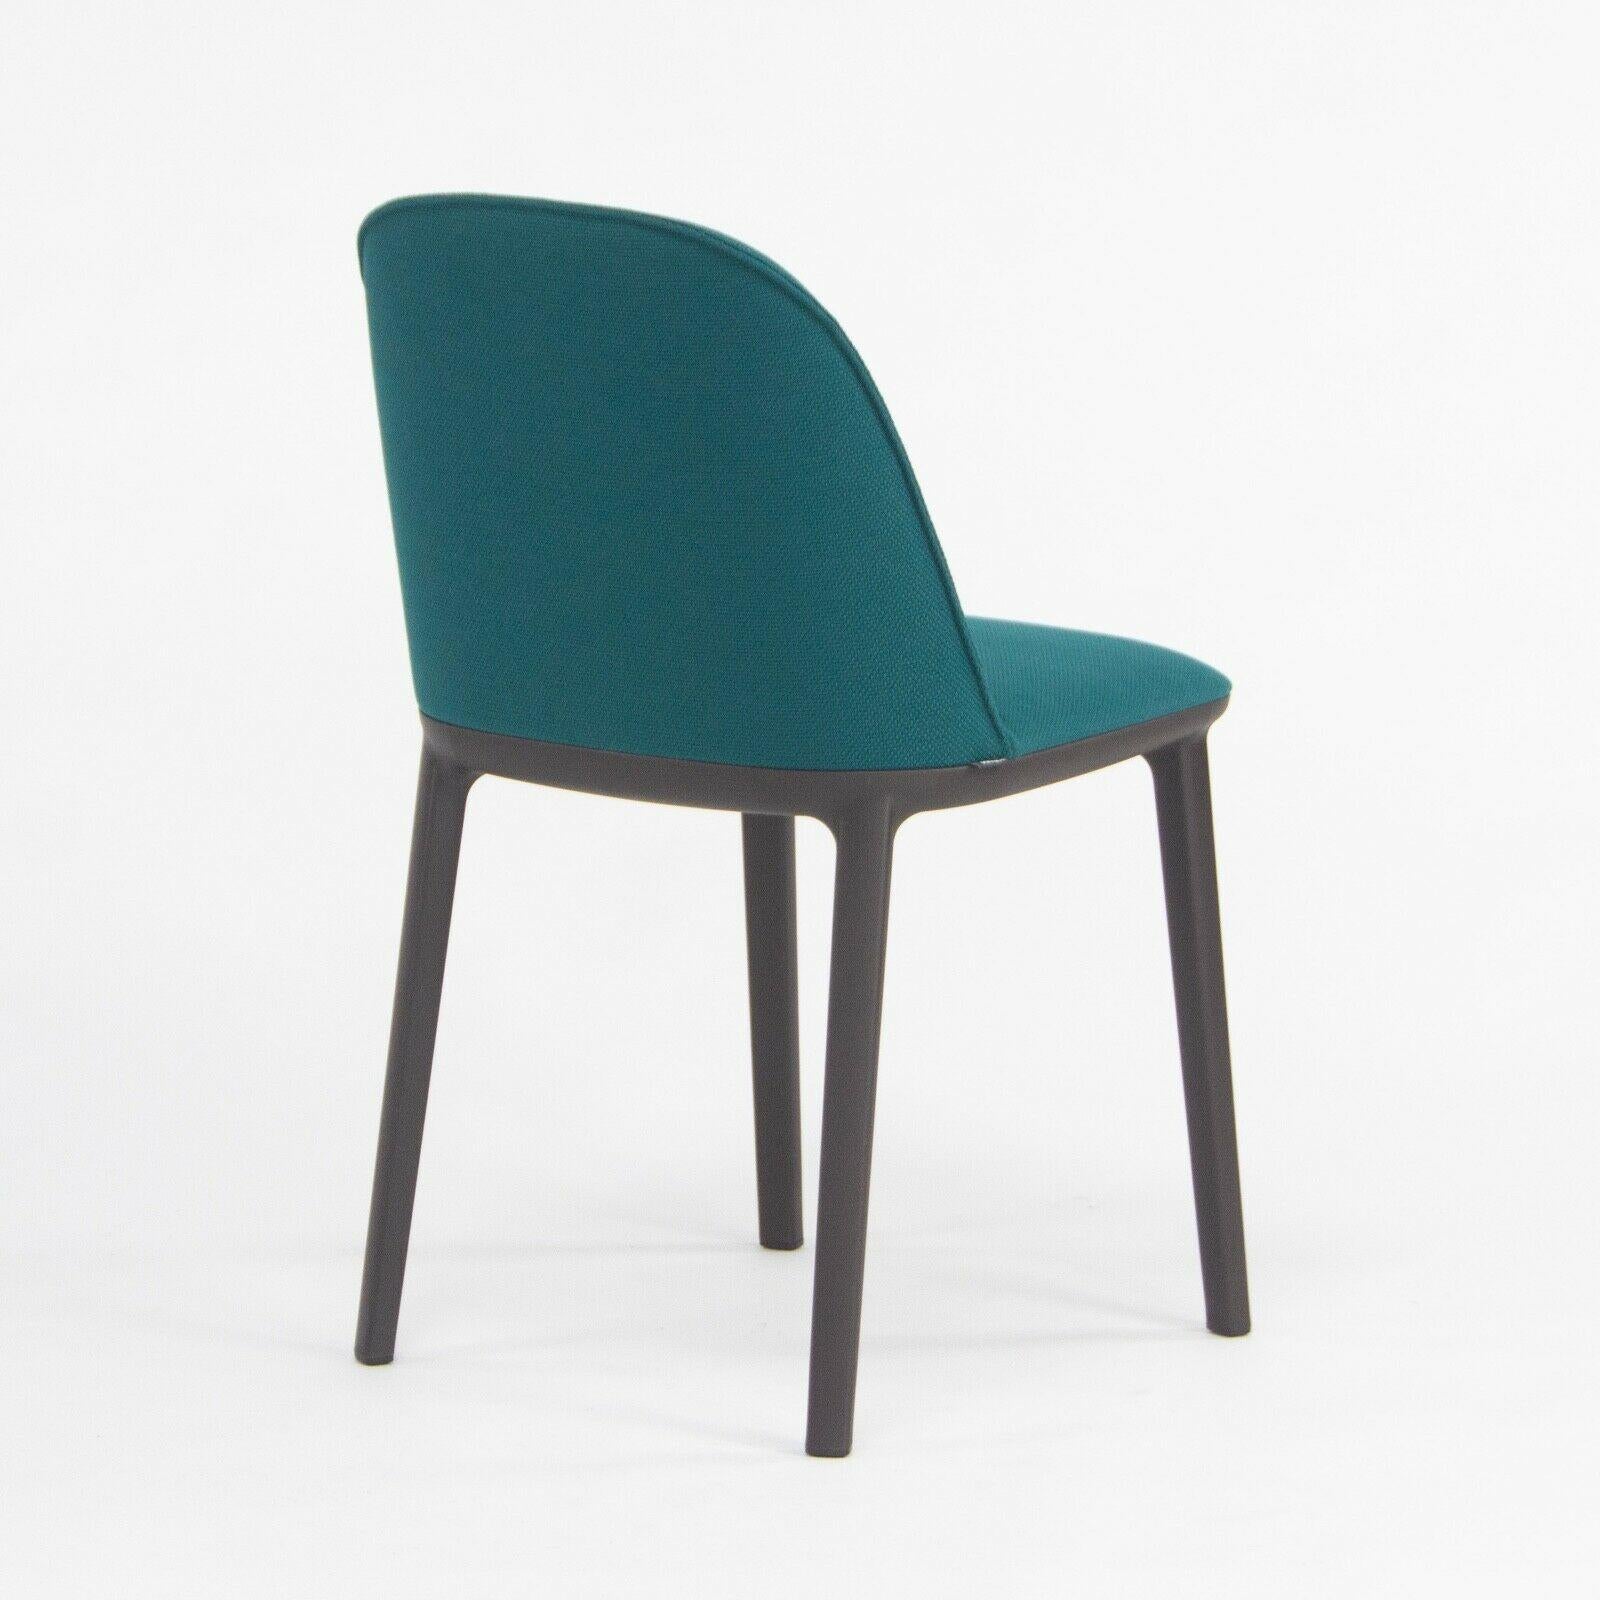 2019 Vitra Softshell Side Chair w/ Teal Blue Fabric by Ronan & Erwan Bouroullec For Sale 1